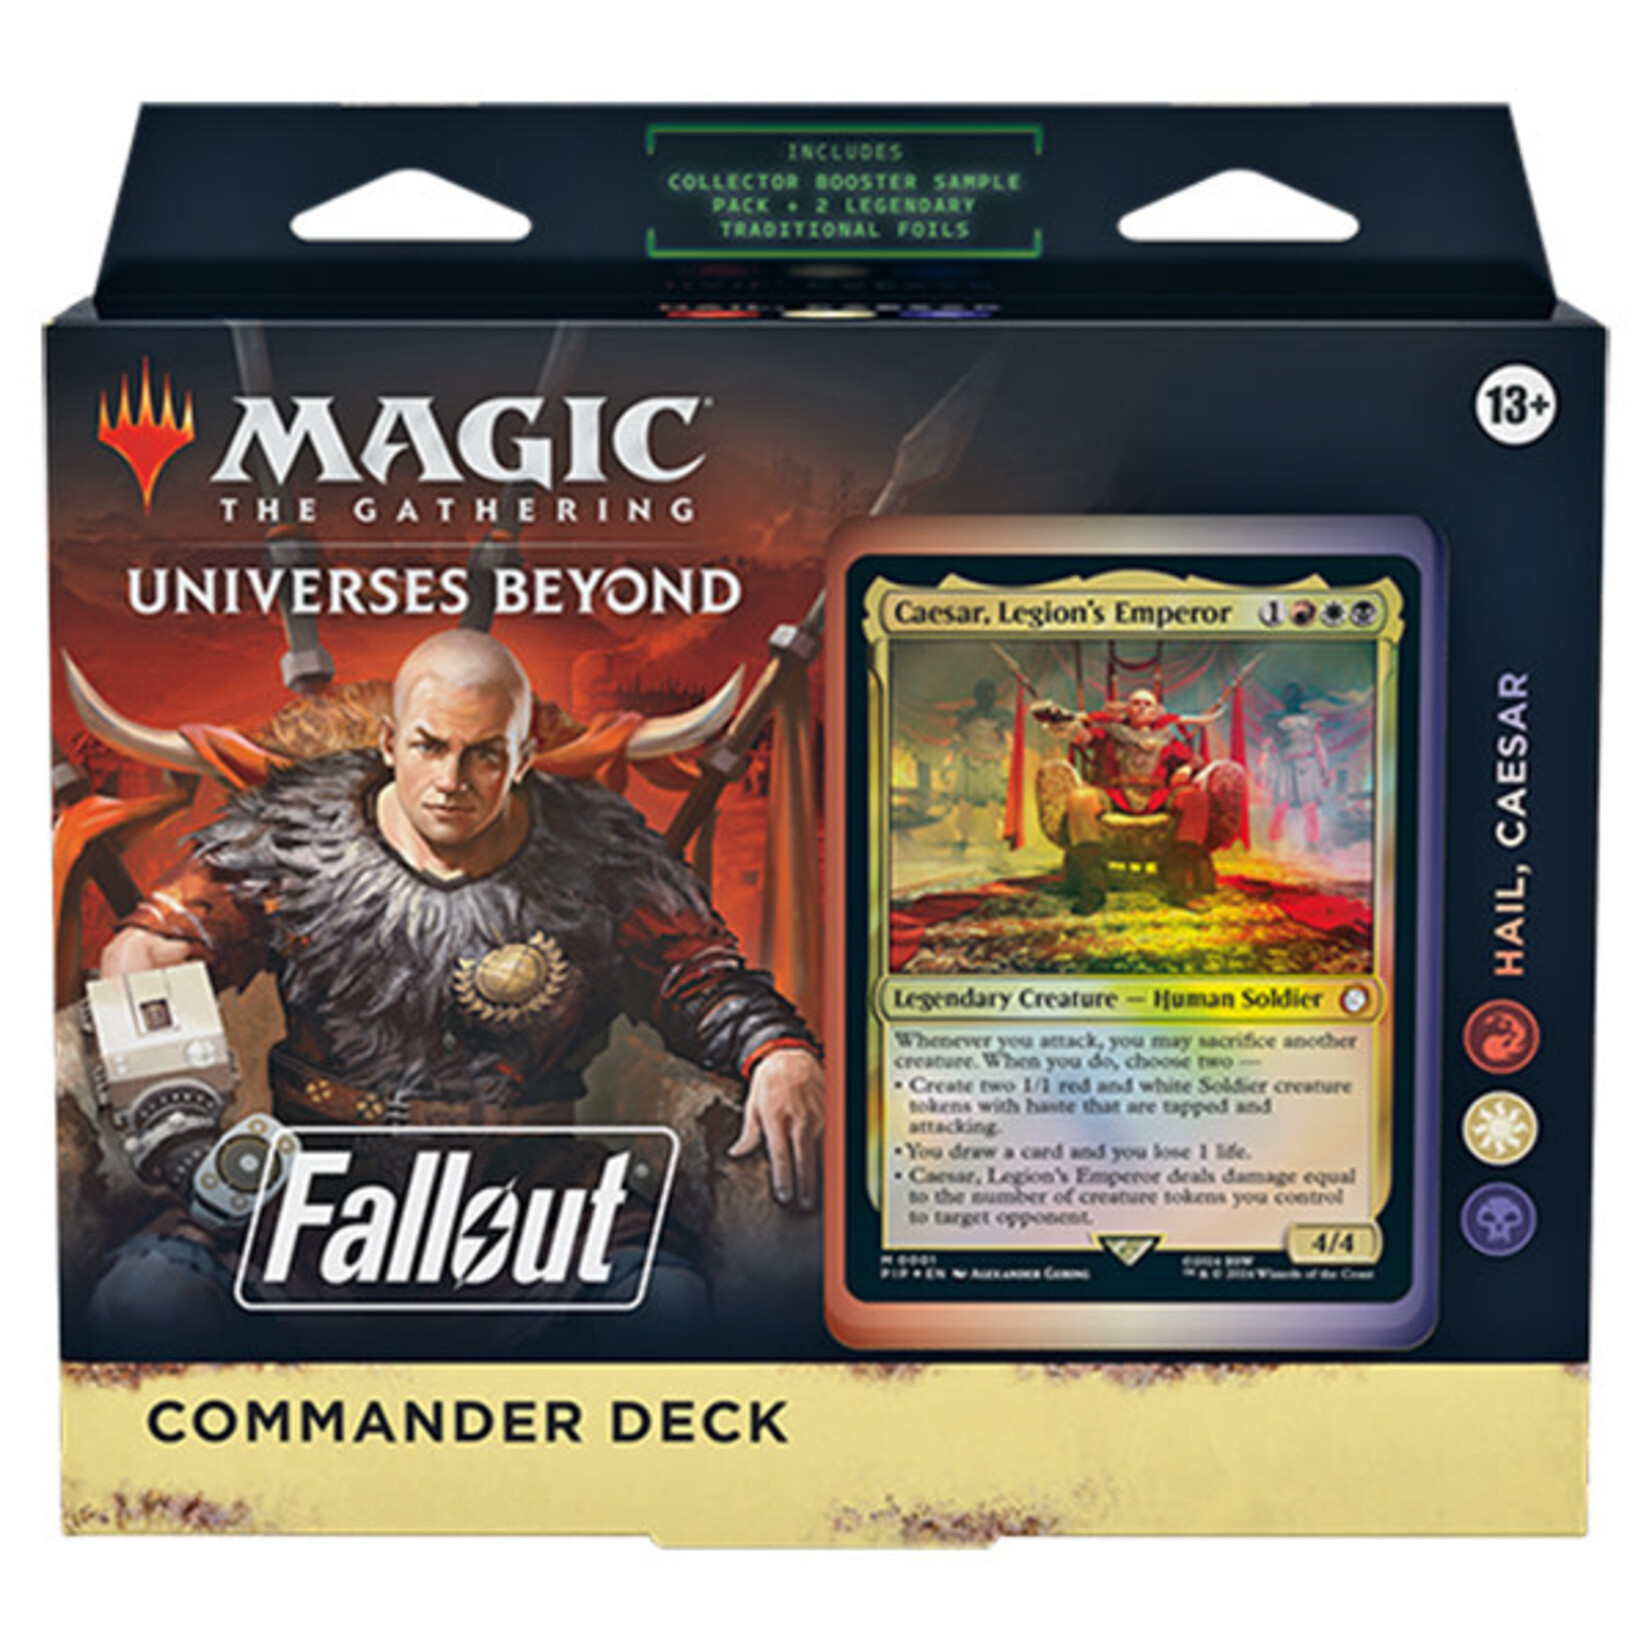 Wizards of the Coast Magic - Fallout Commander Deck "Hail Caeser" (Red, White, Black)